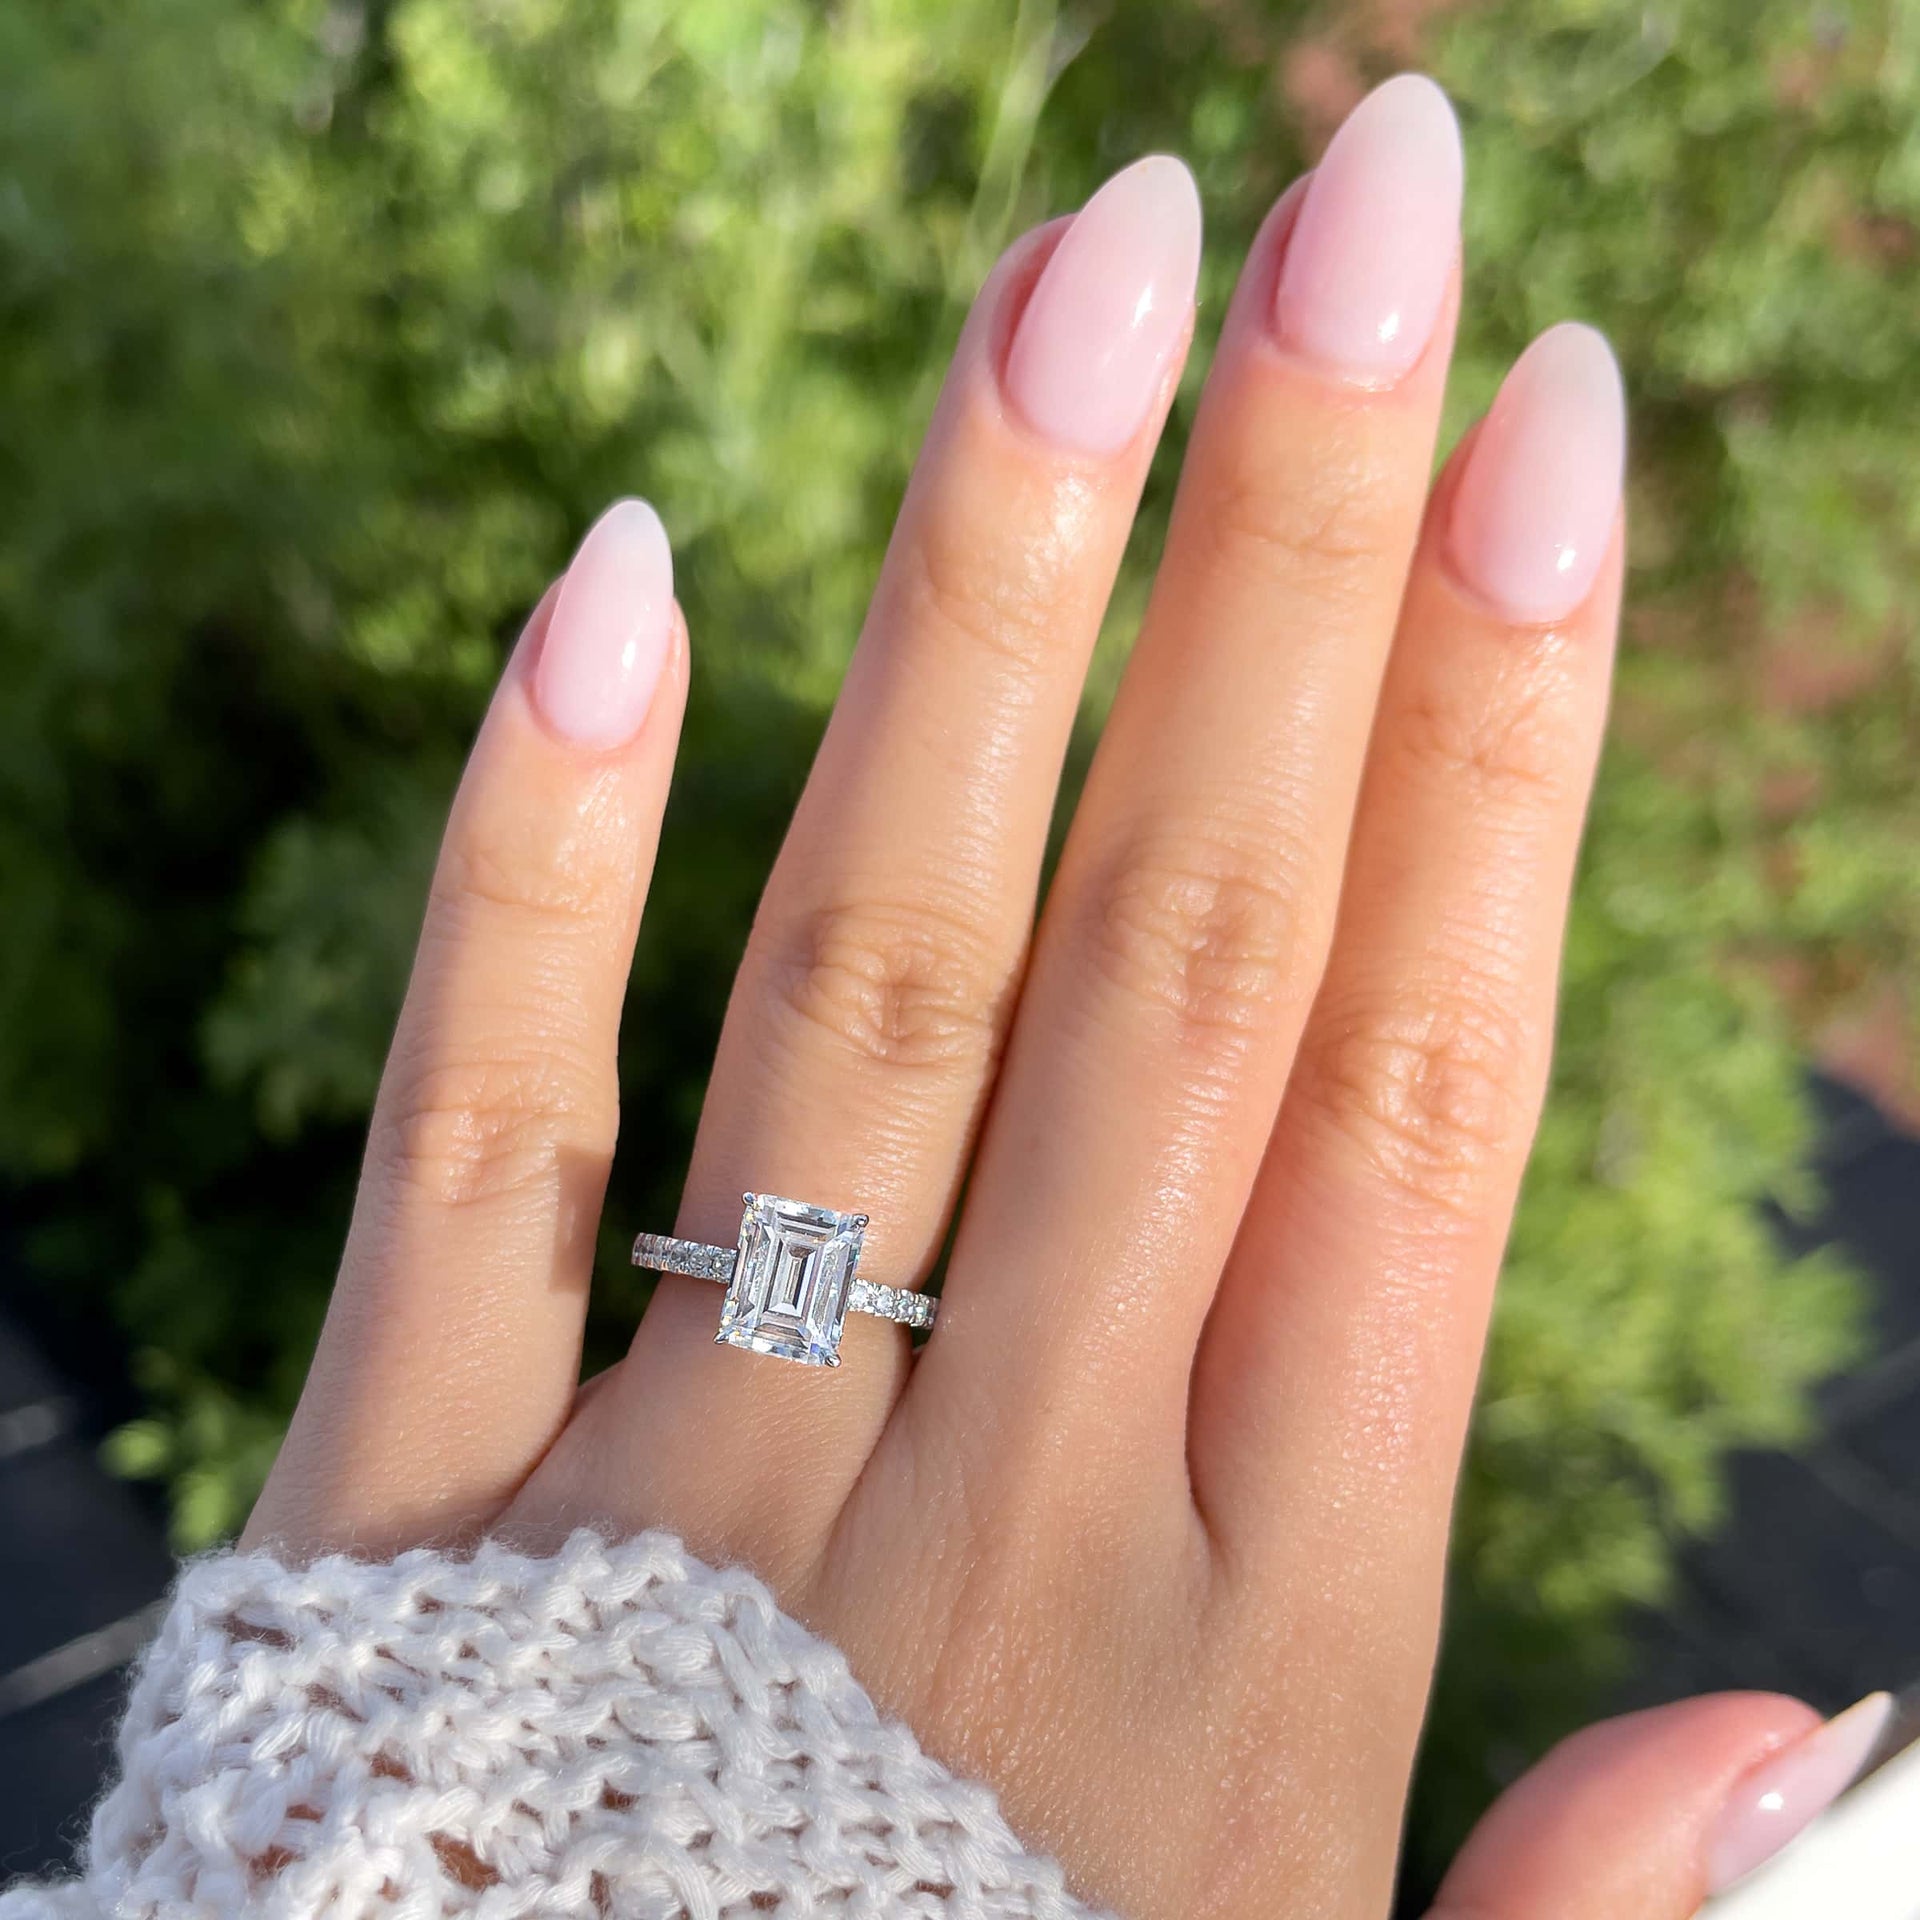 Classic emerald cut engagement ring modeled on female hand